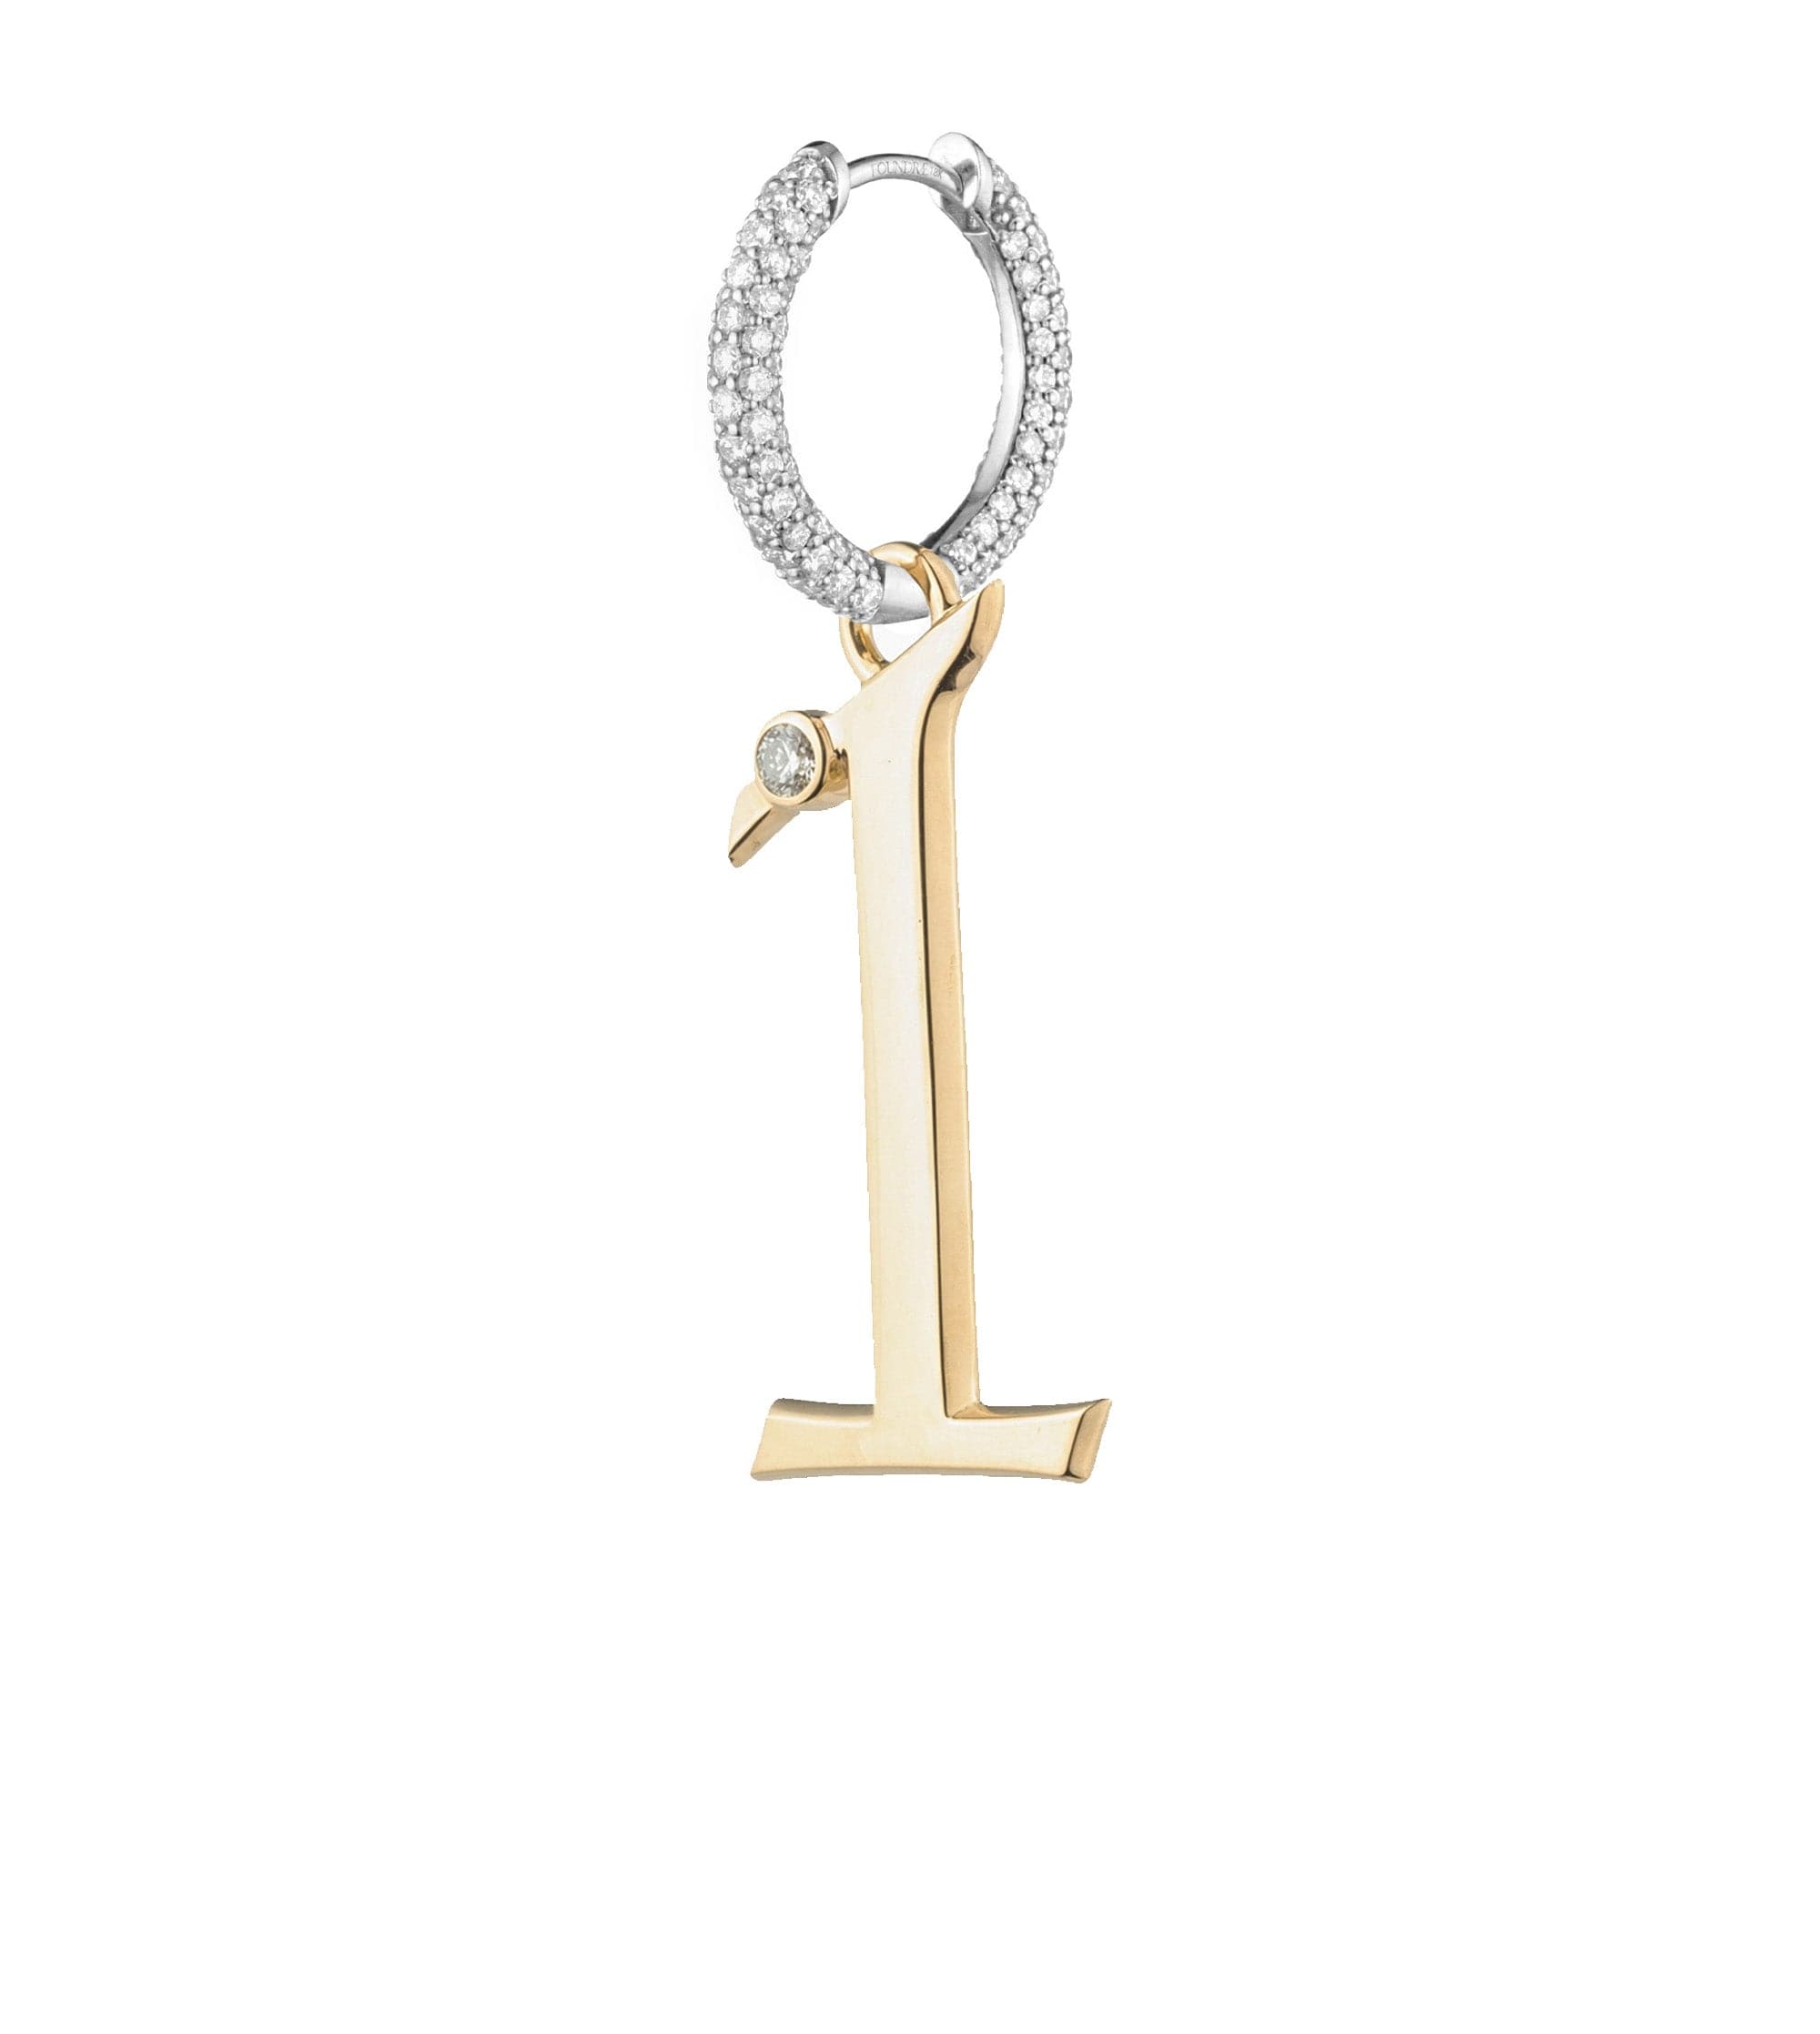 Engravable Number 1 : Oversized Small Pave Chubby Ear Hoop